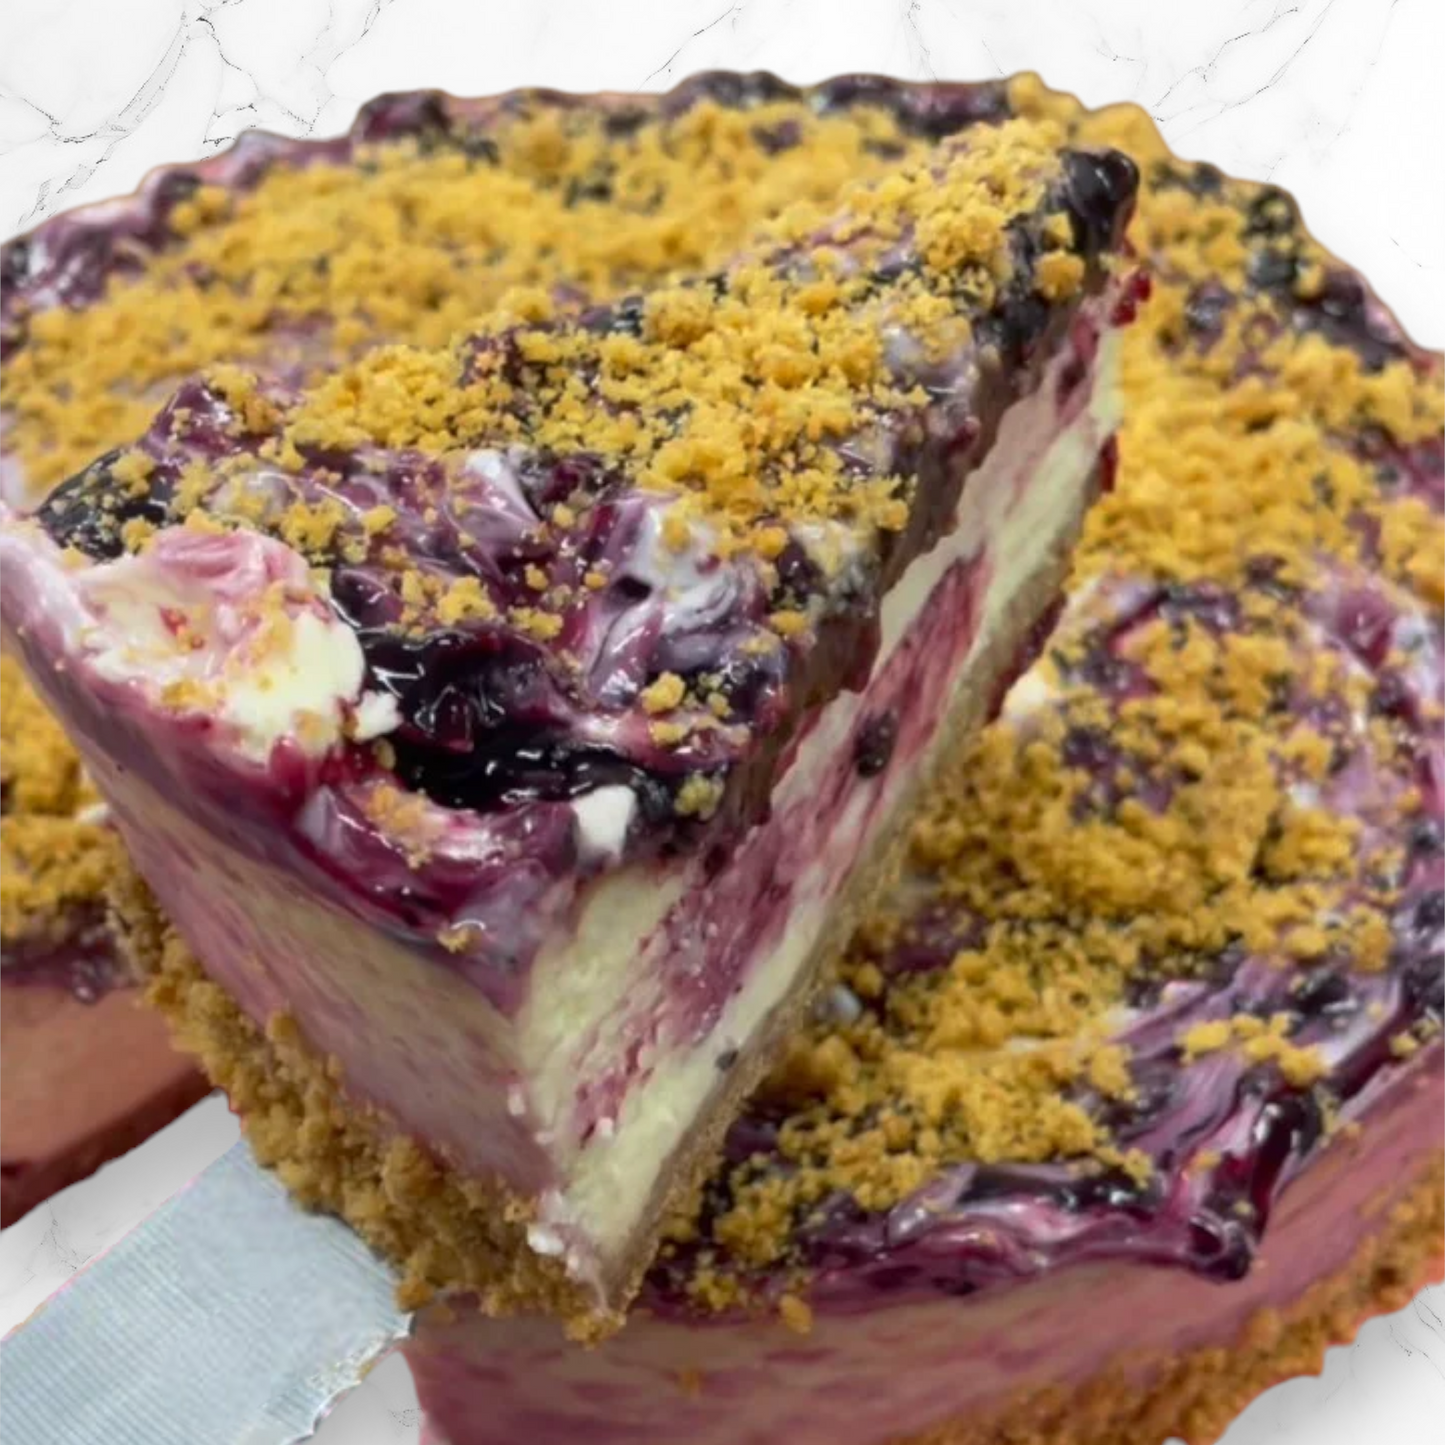 Blueberry Crumble Baked Cheesecake